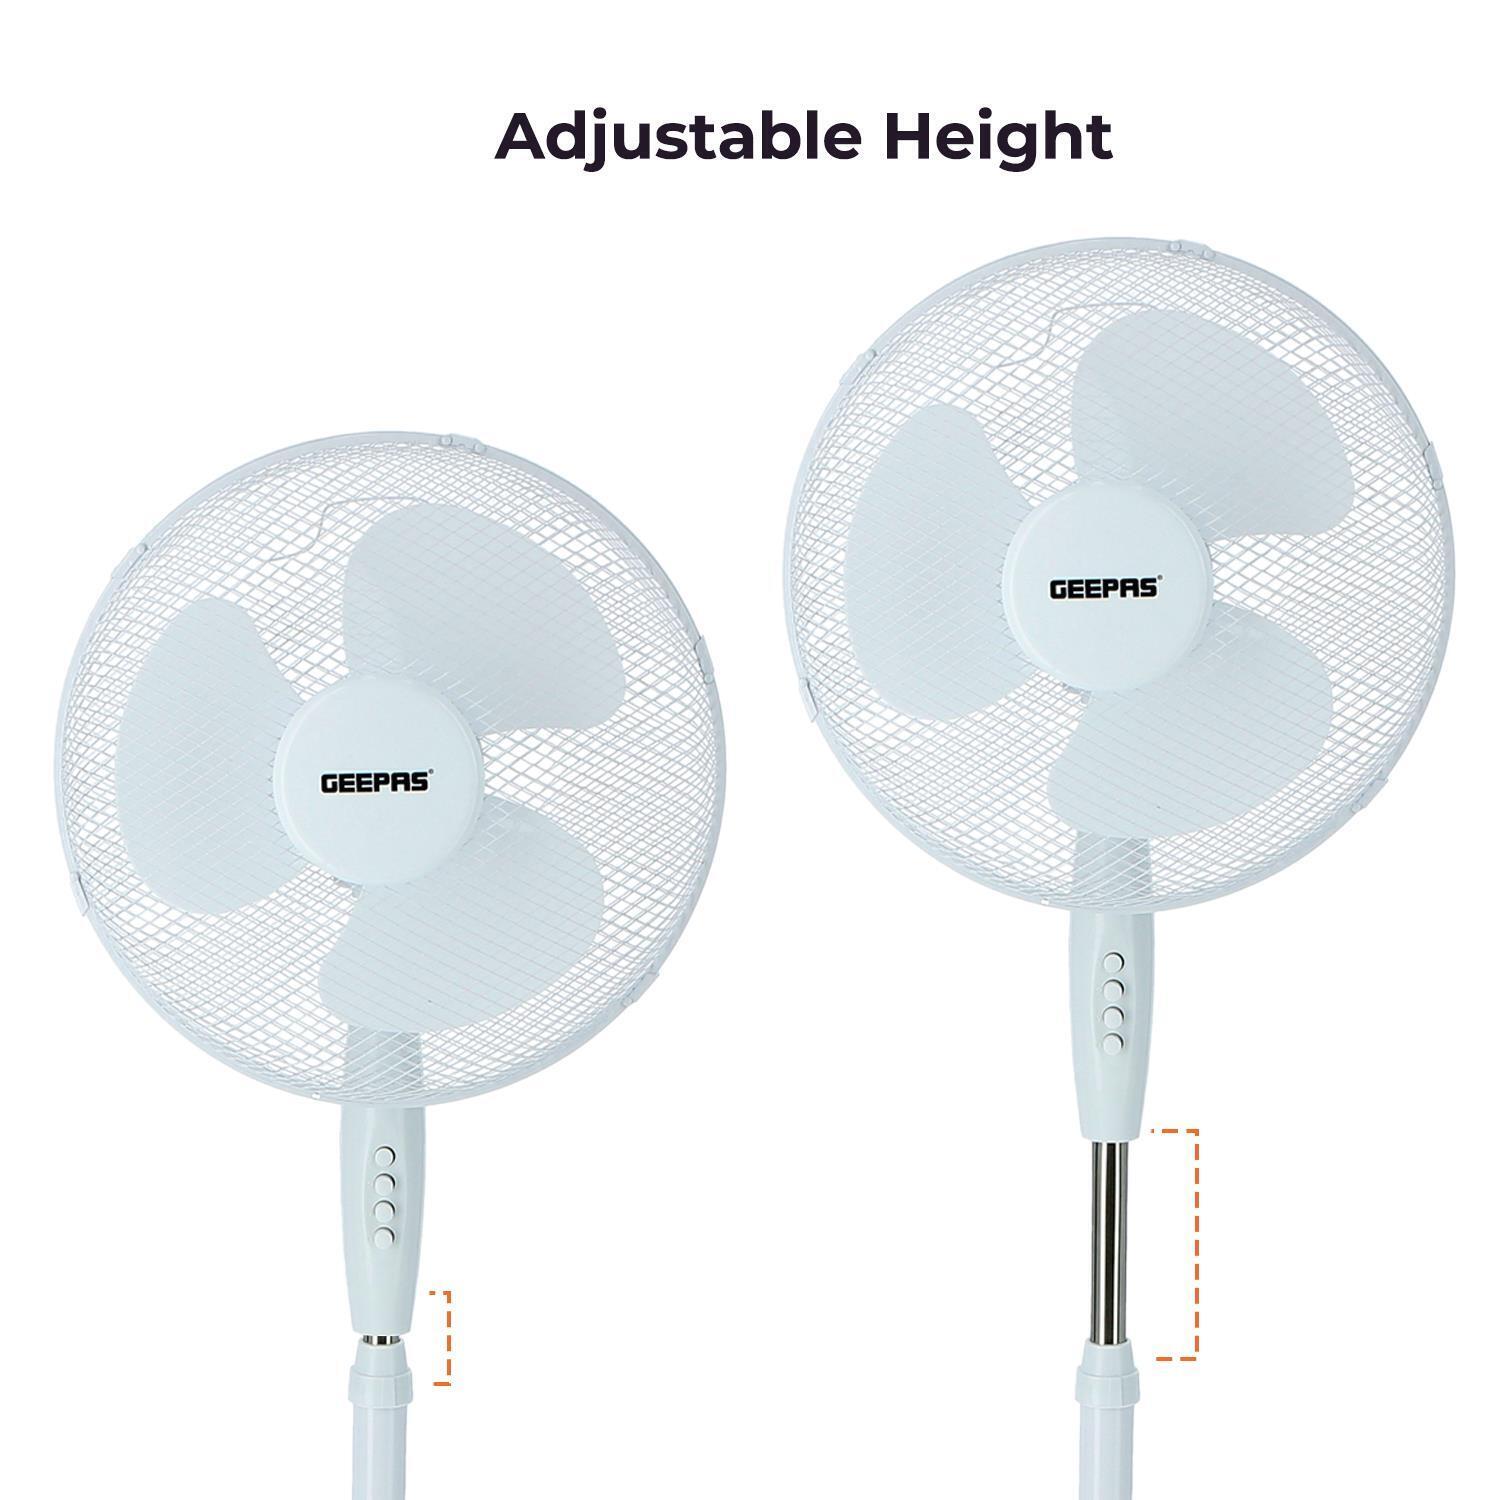 Two White 16" Oscillating Standing Pedestal Fans